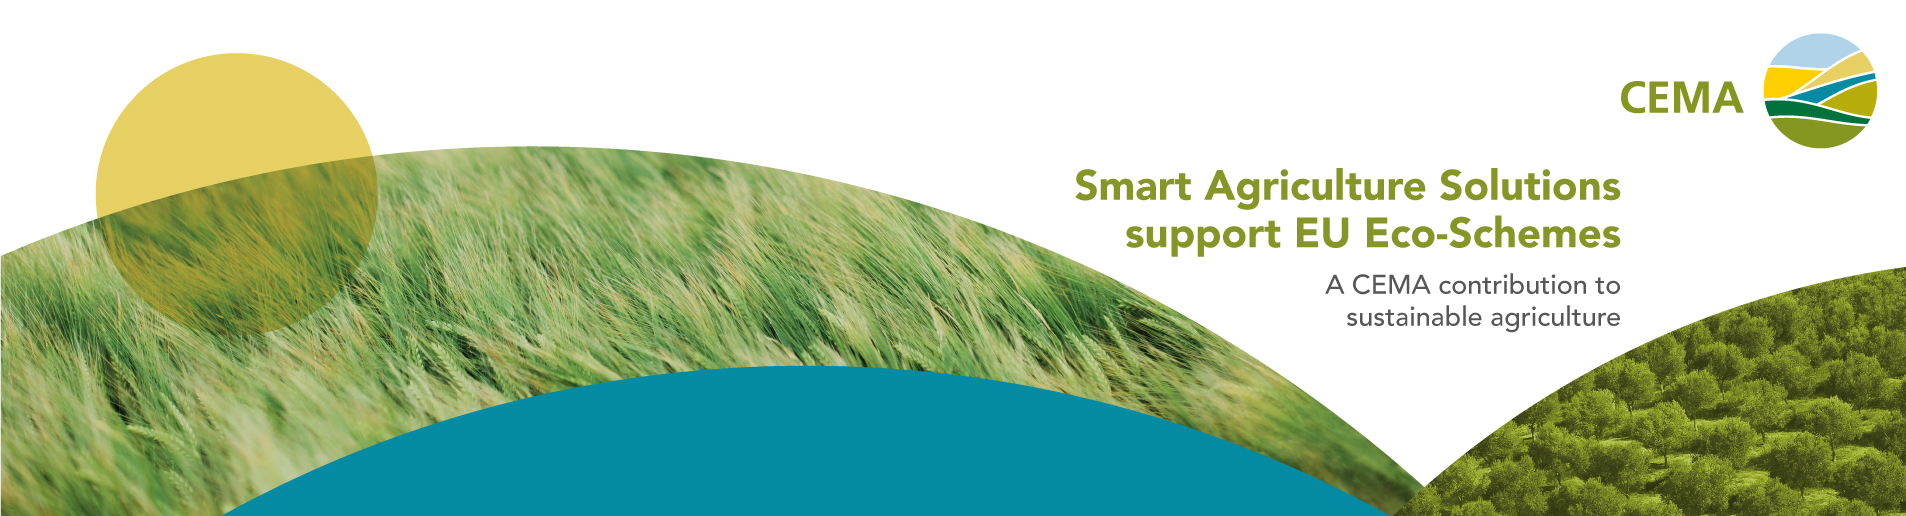 Smart Agriculture Solutions support EU Eco-Schemes